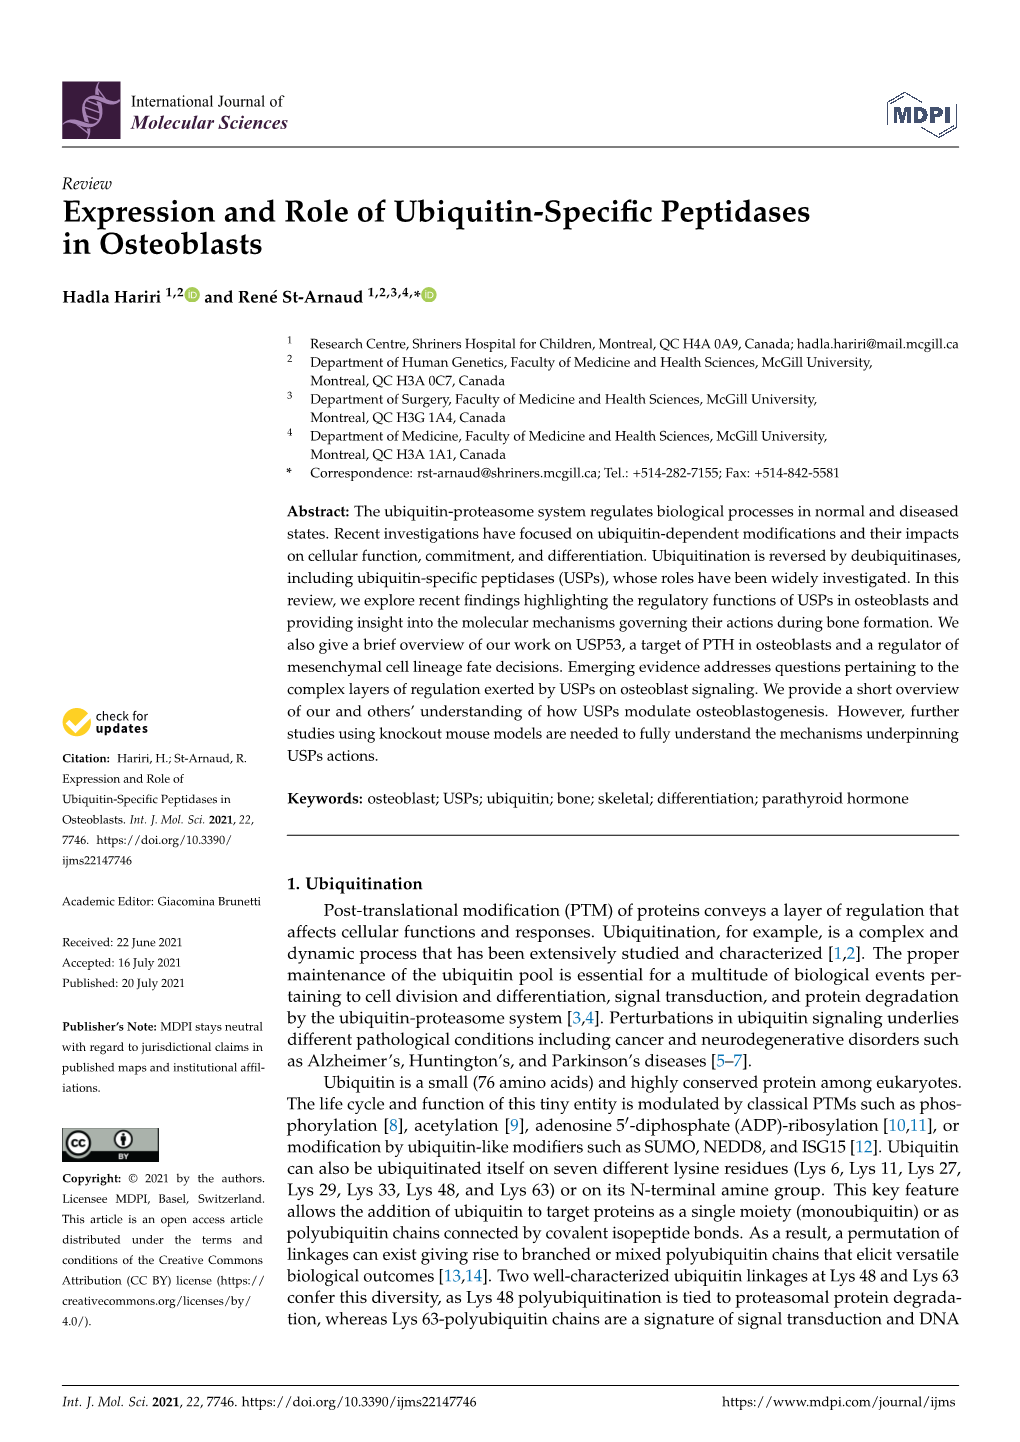 Expression and Role of Ubiquitin-Specific Peptidases In